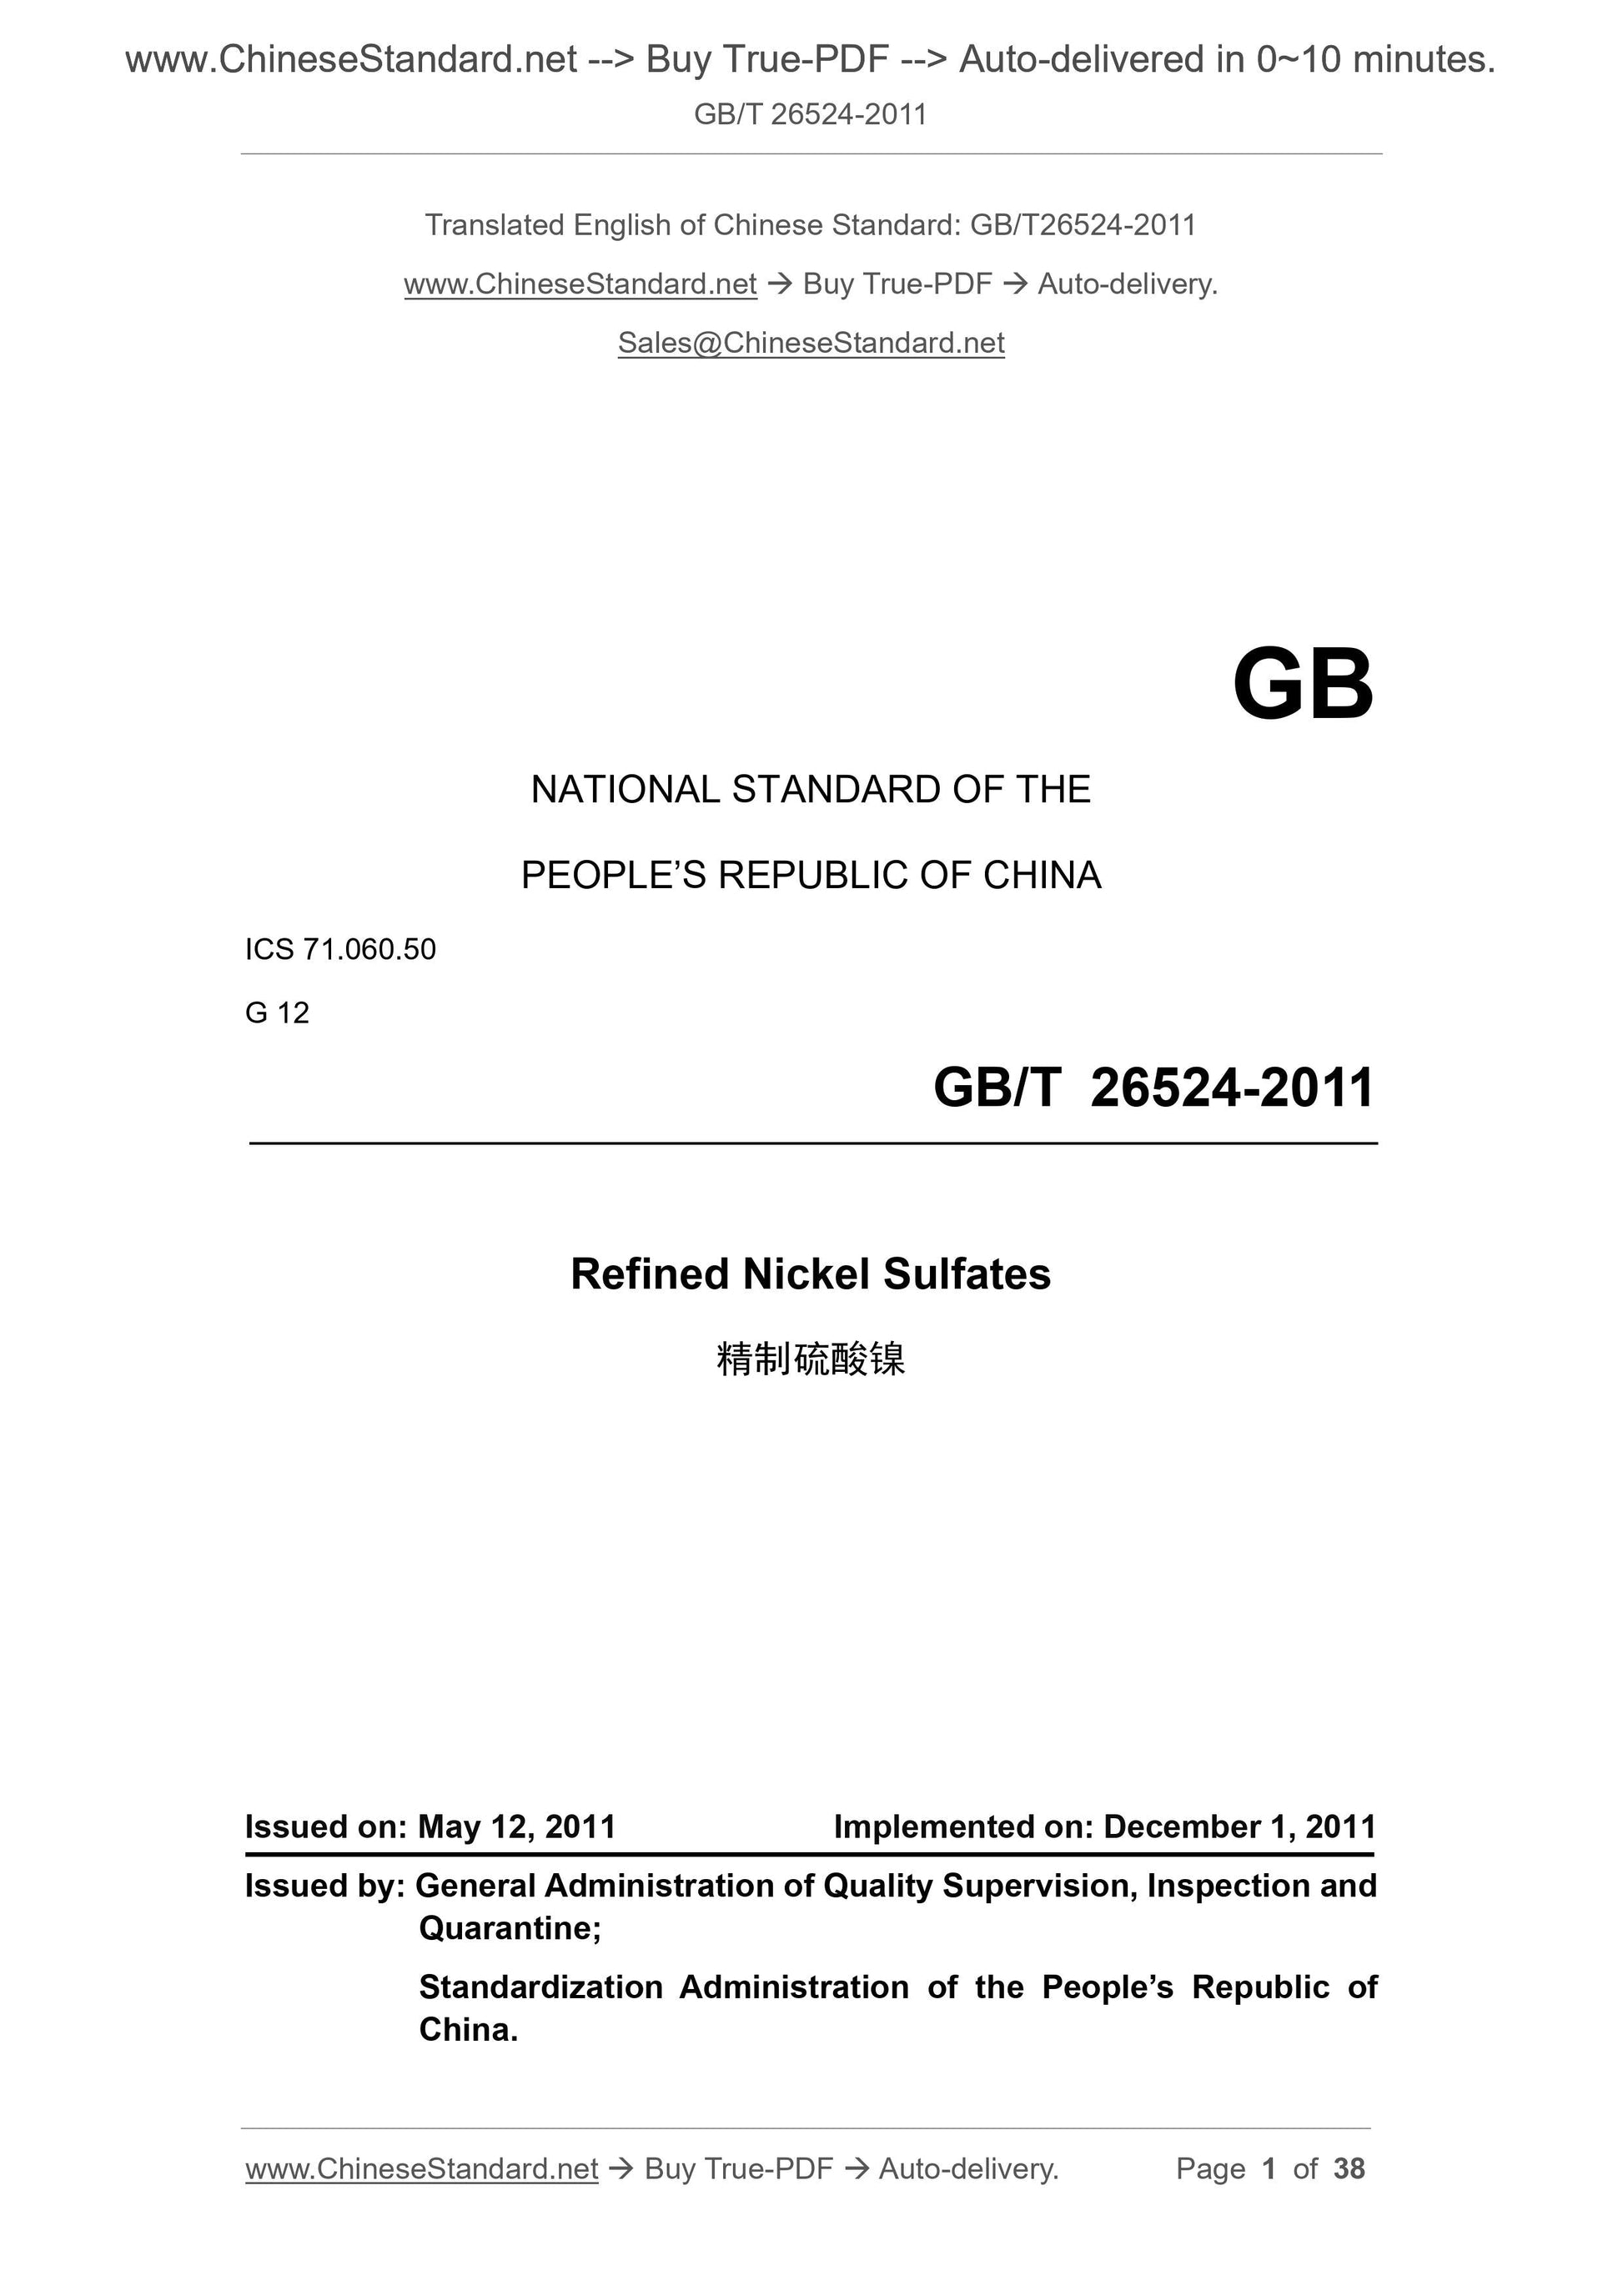 GB/T 26524-2011 Page 1